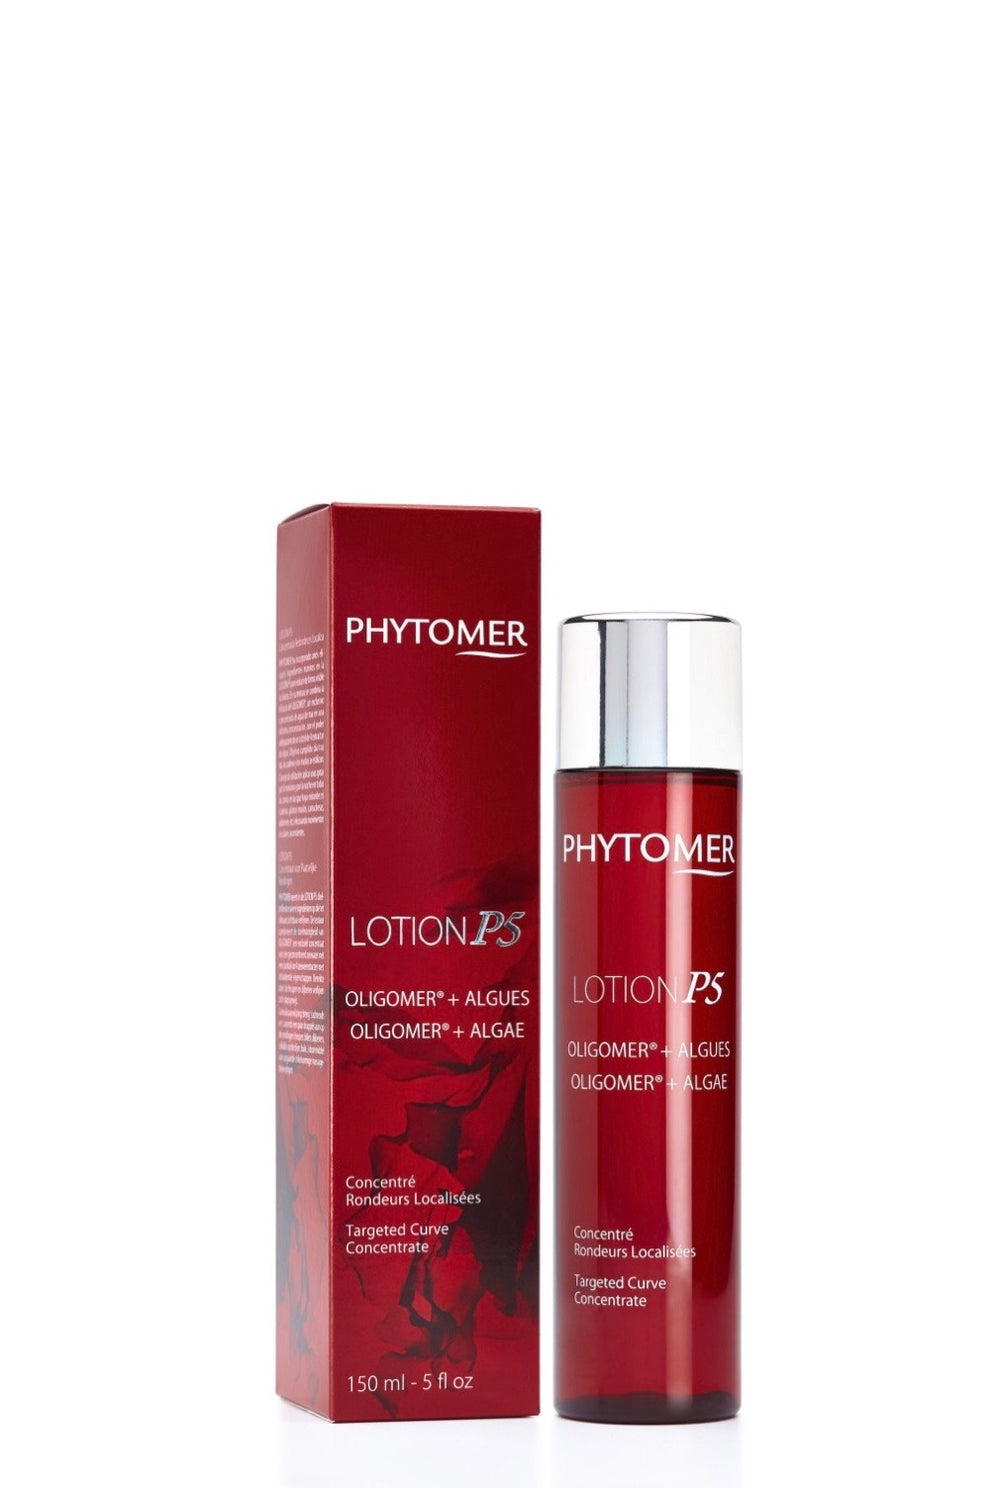 LOTION P5 Target Curve Concentrate - 150ml